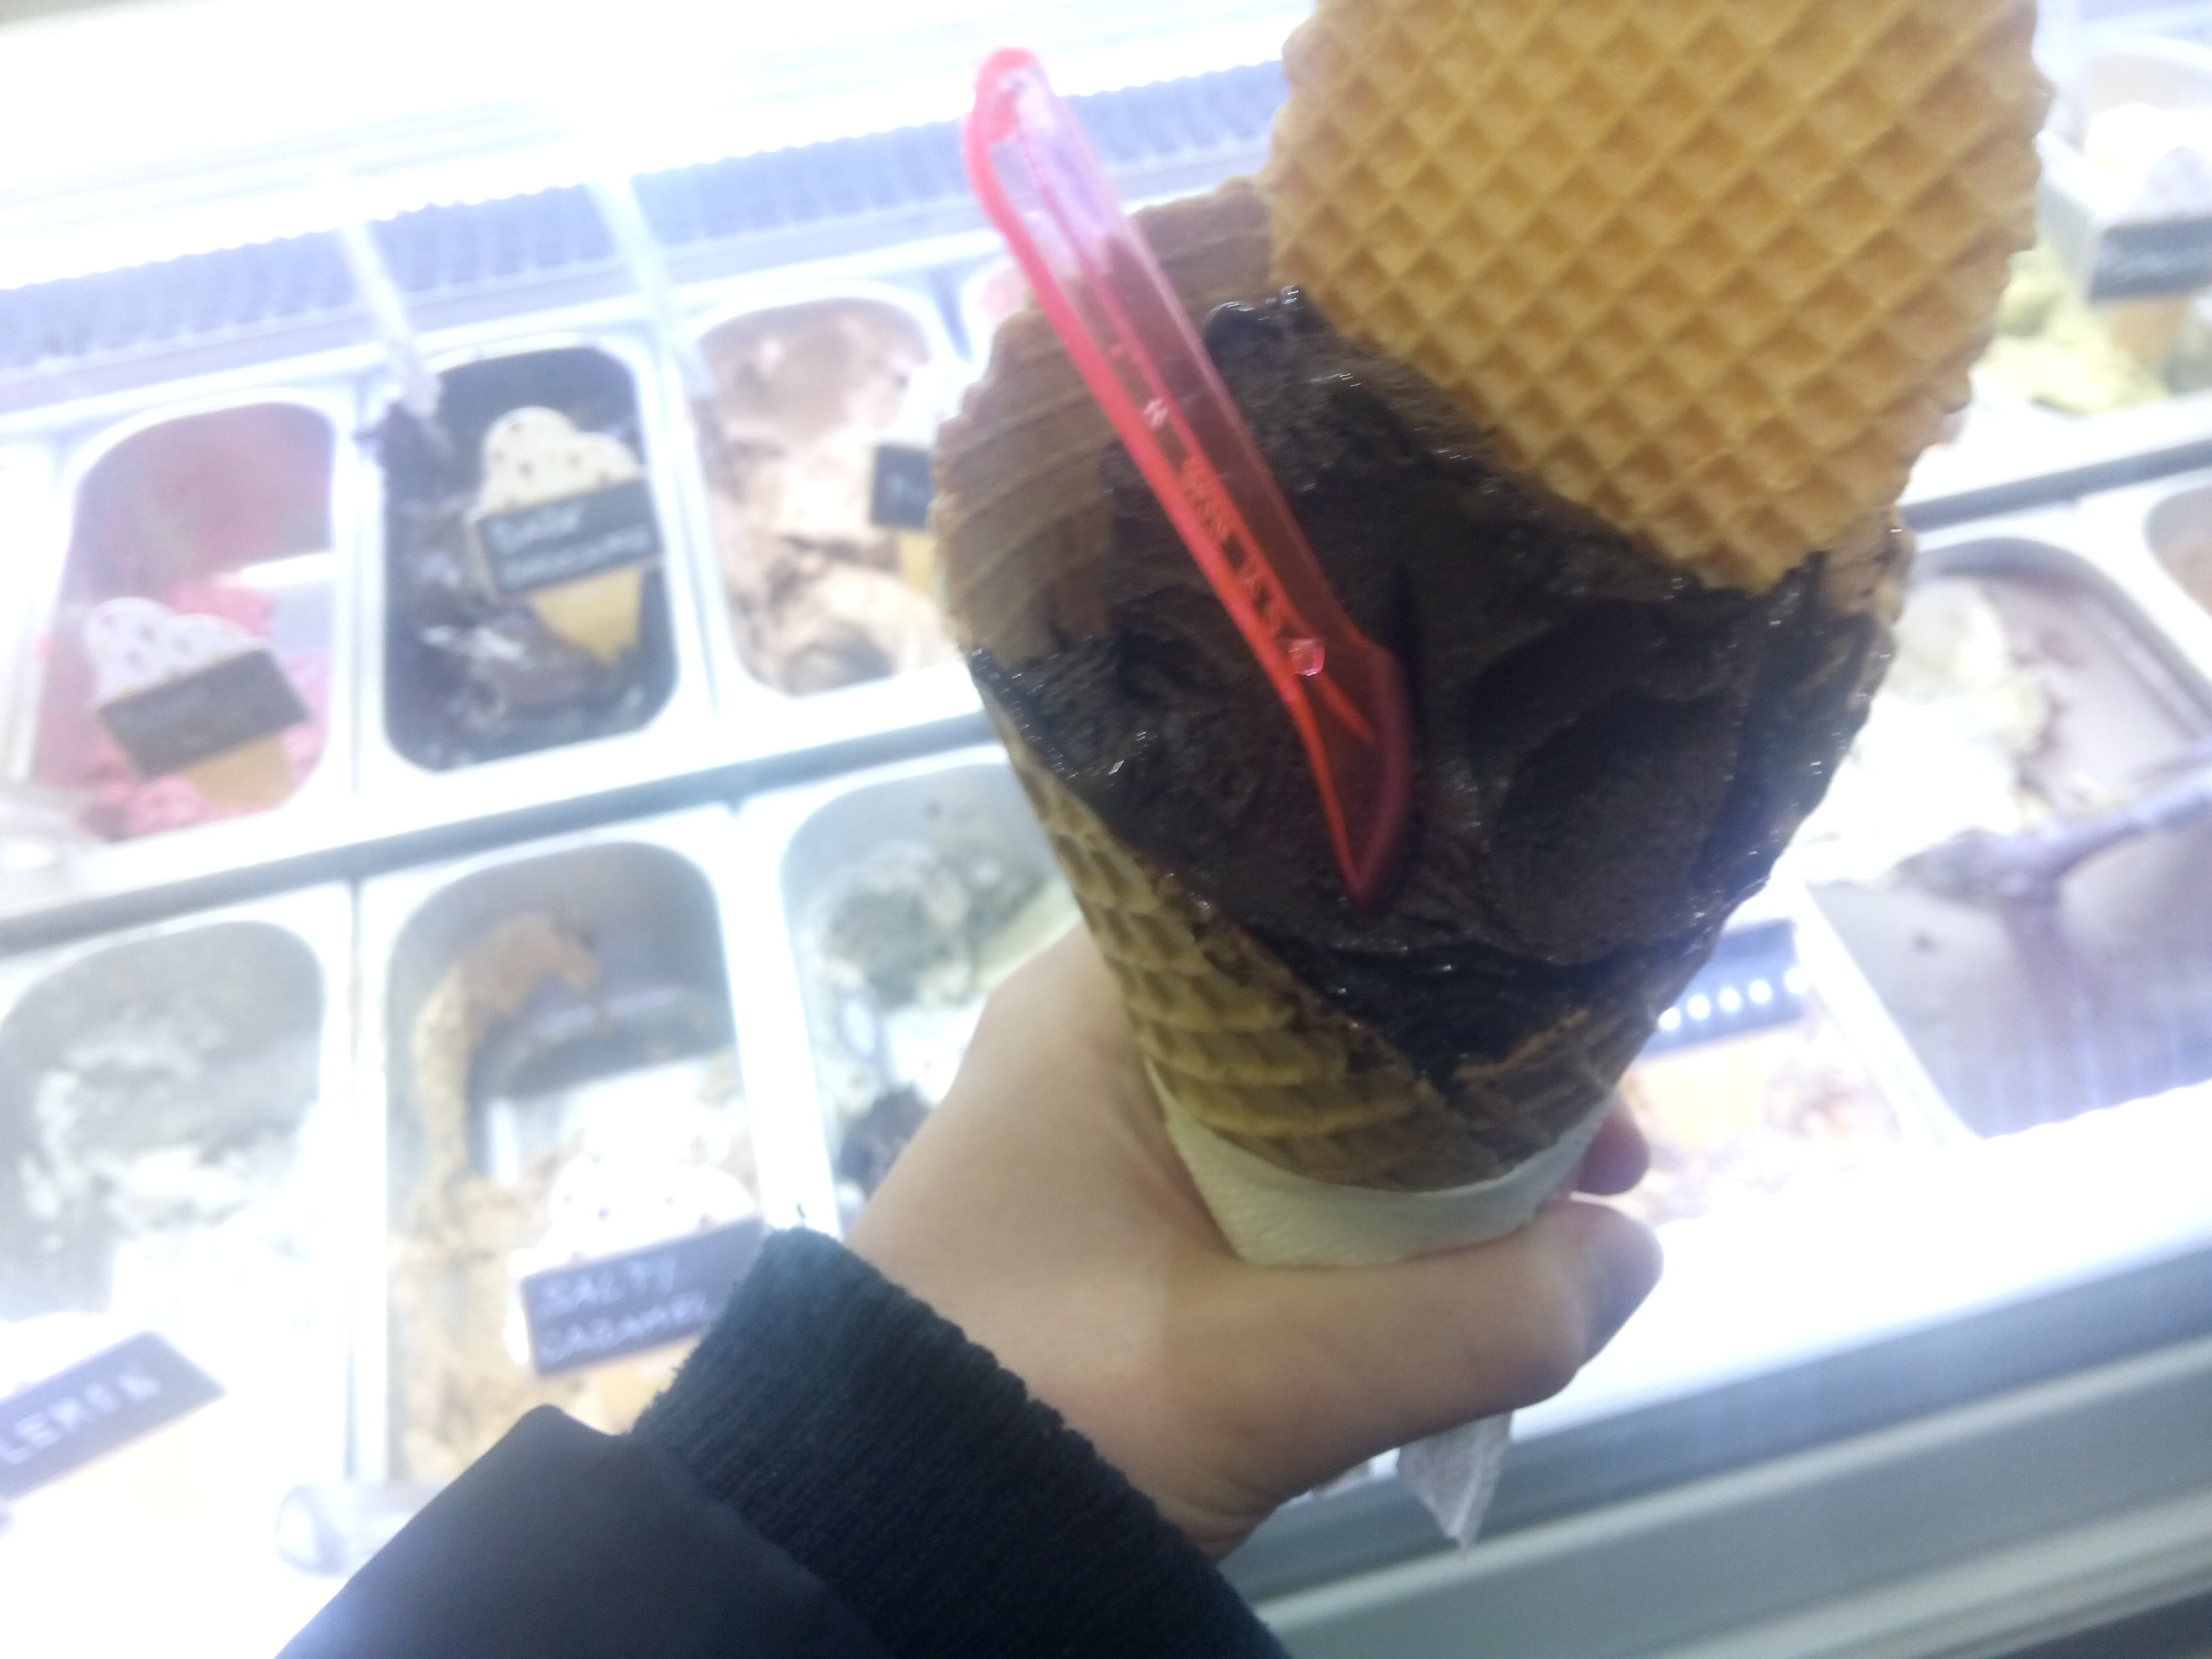 A large dark chocolate ice cream in a waffle cone, against a background of more ice cream